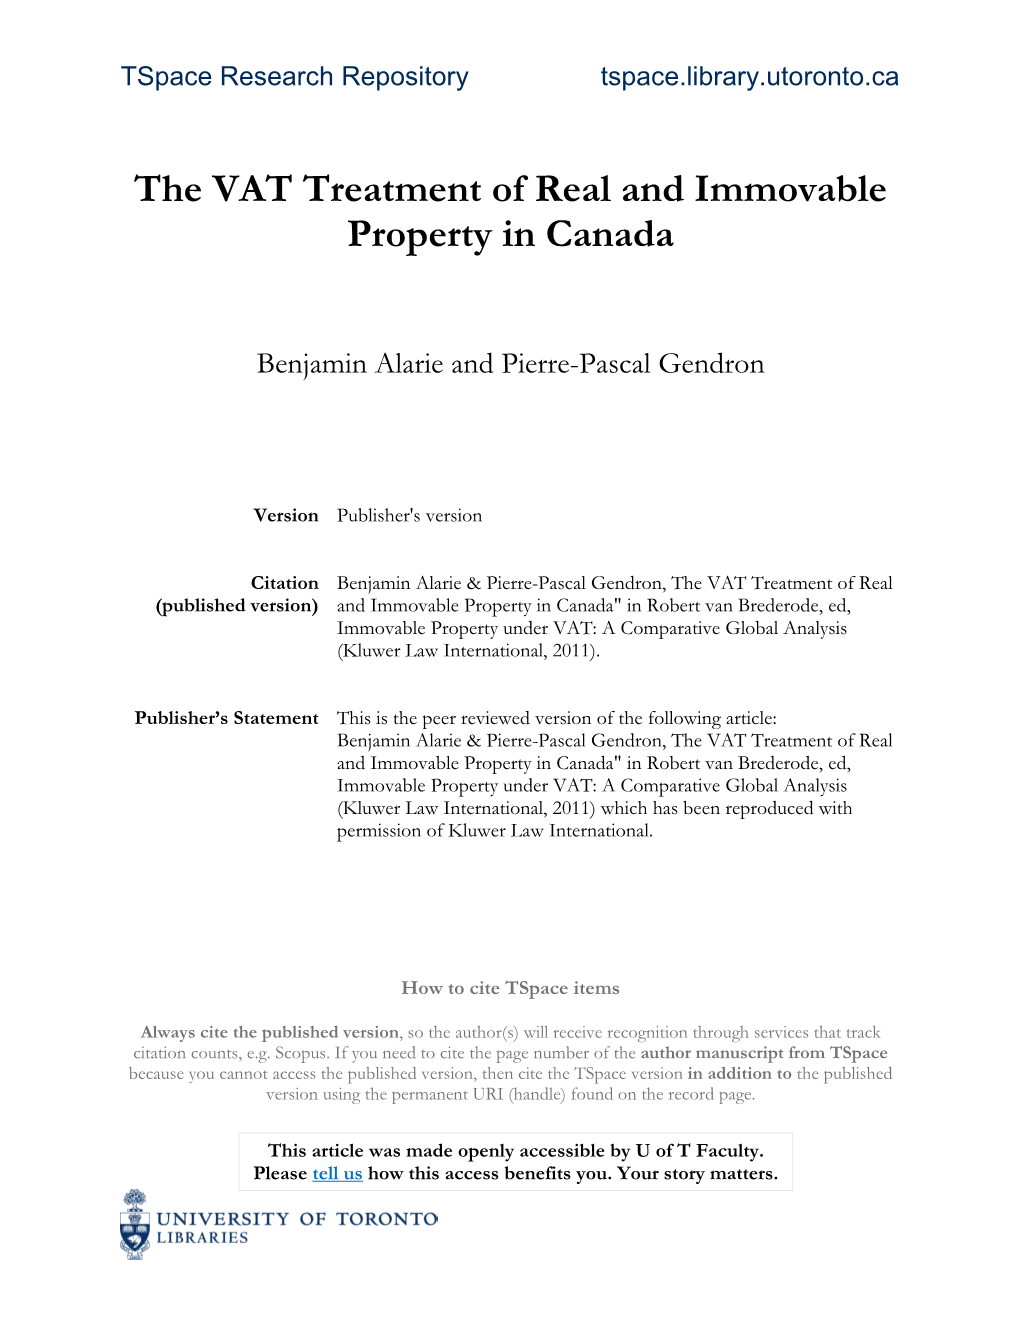 The VAT Treatment of Real and Immovable Property in Canada